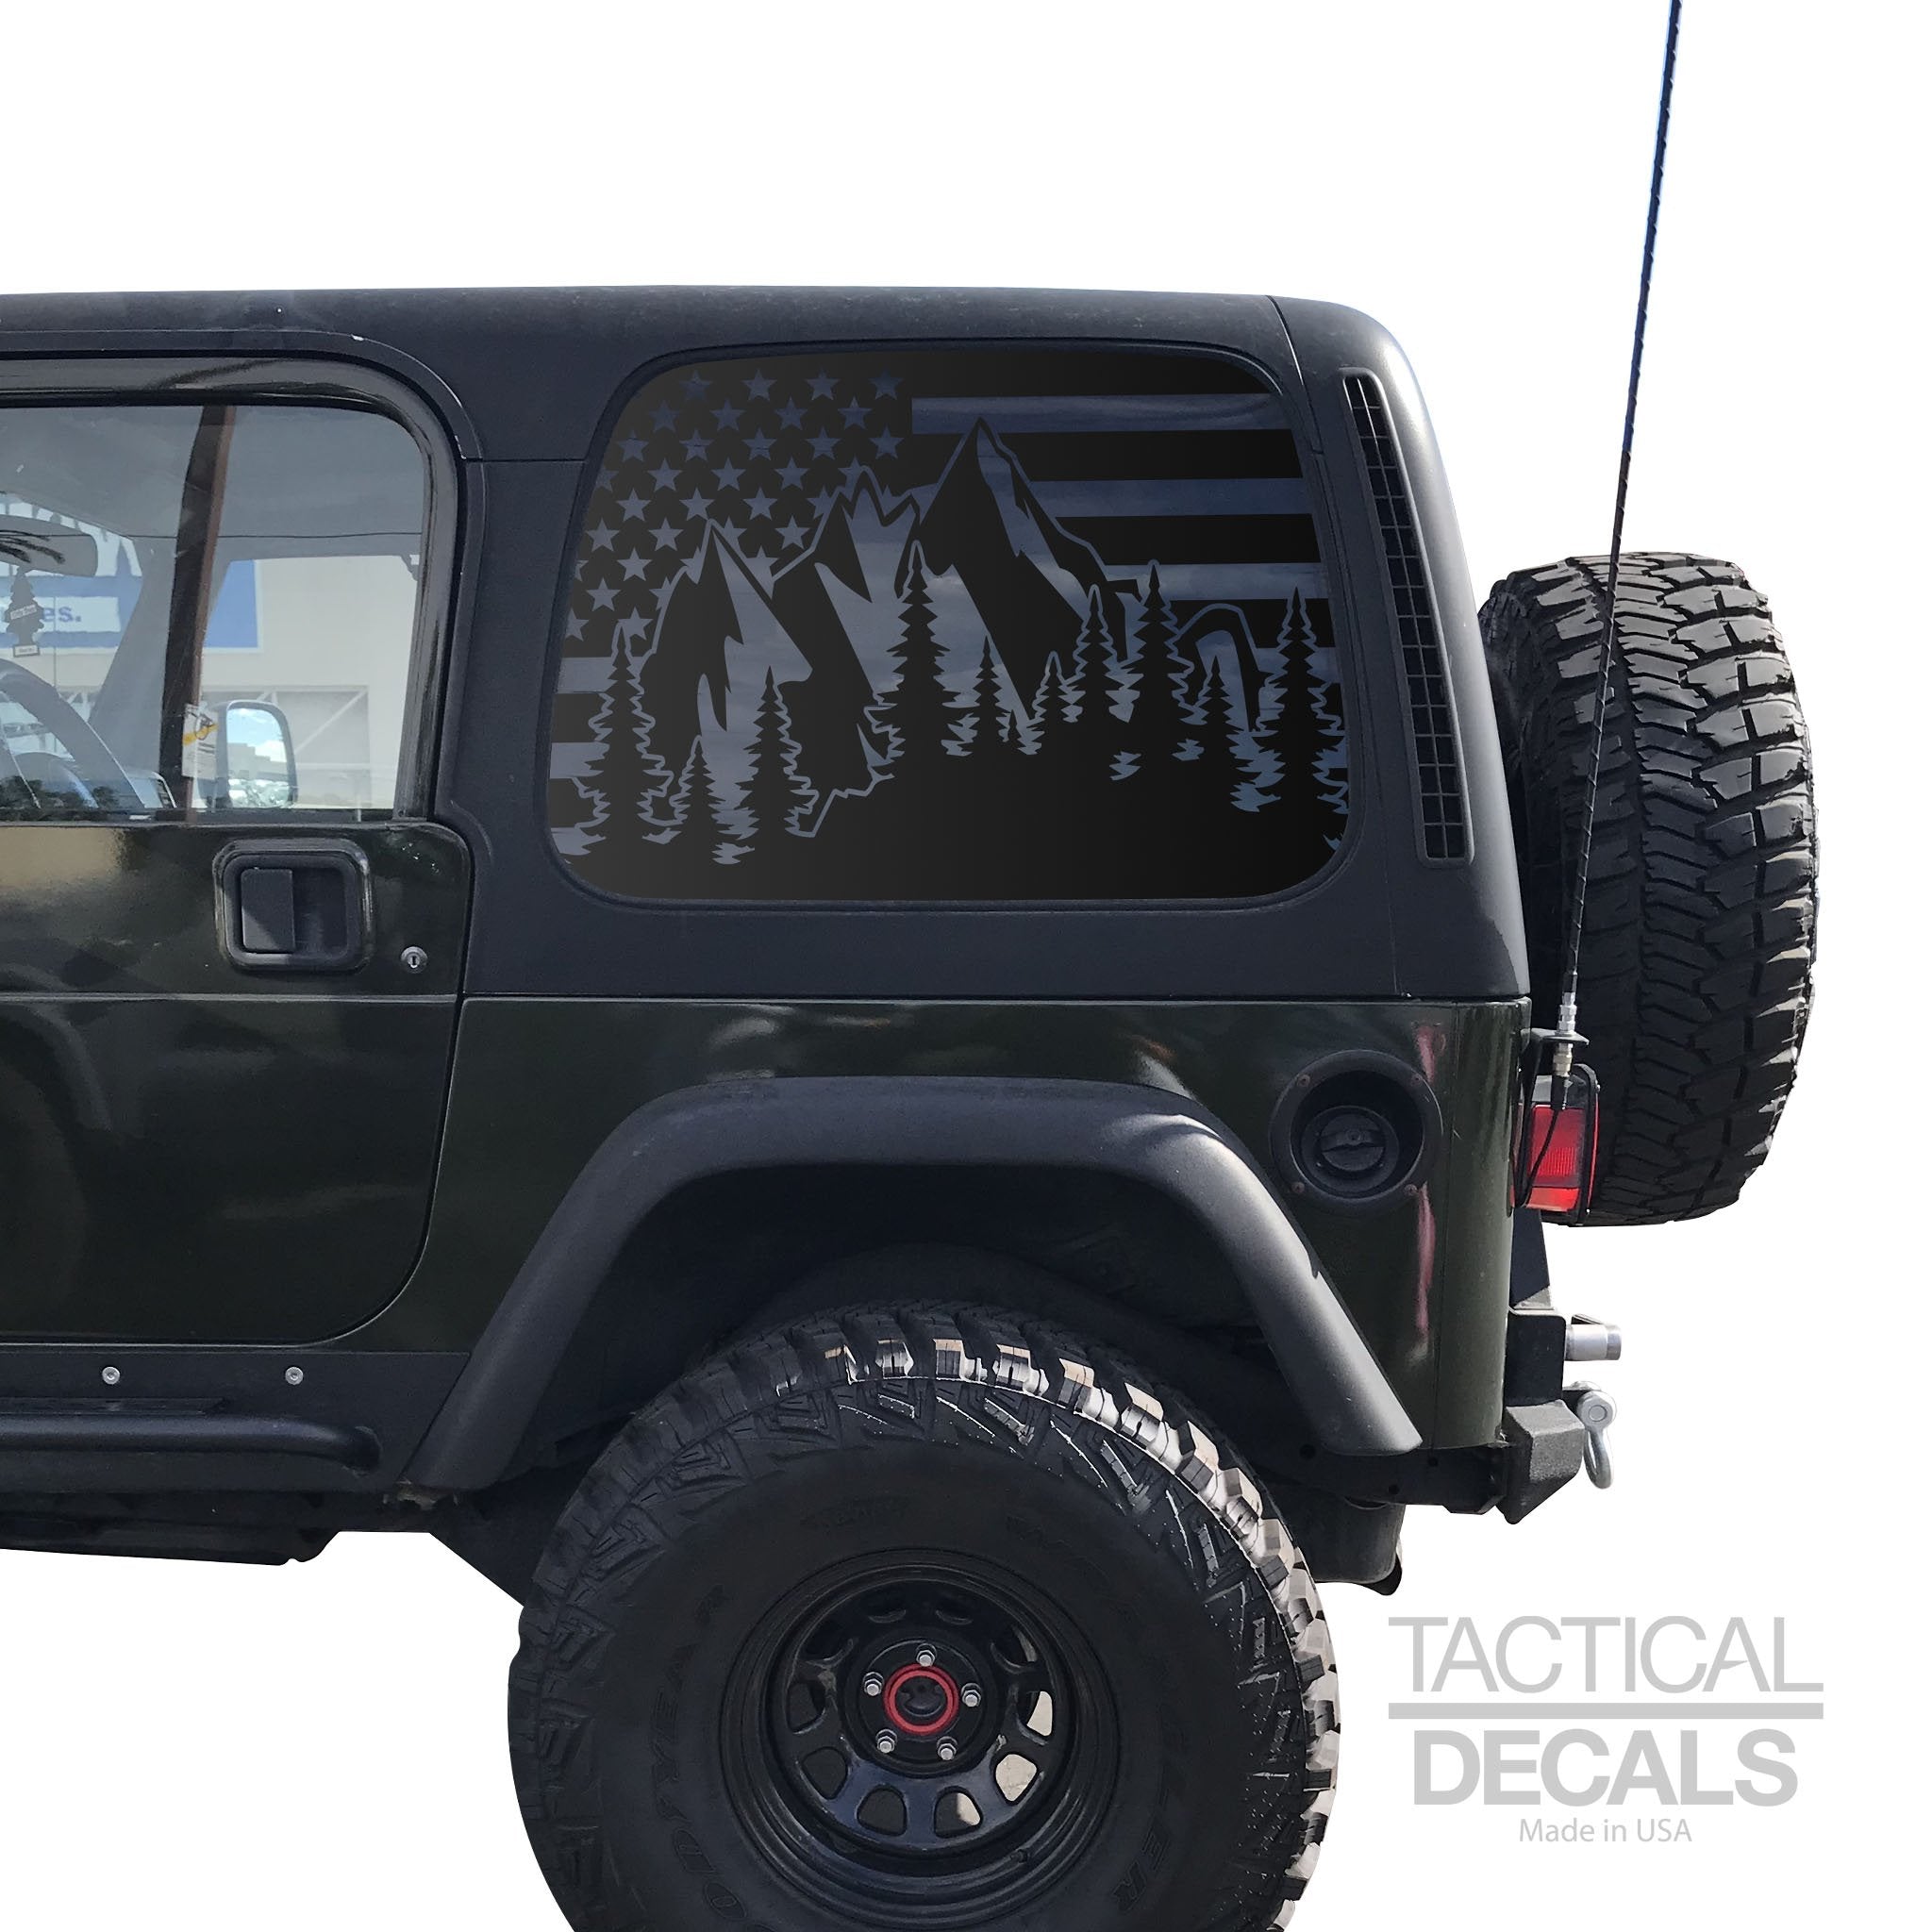 USA Flag w/Mountains Decal for 1997 - 2006 Jeep Wrangler TJ 2 Door onl –  Tactical Decals